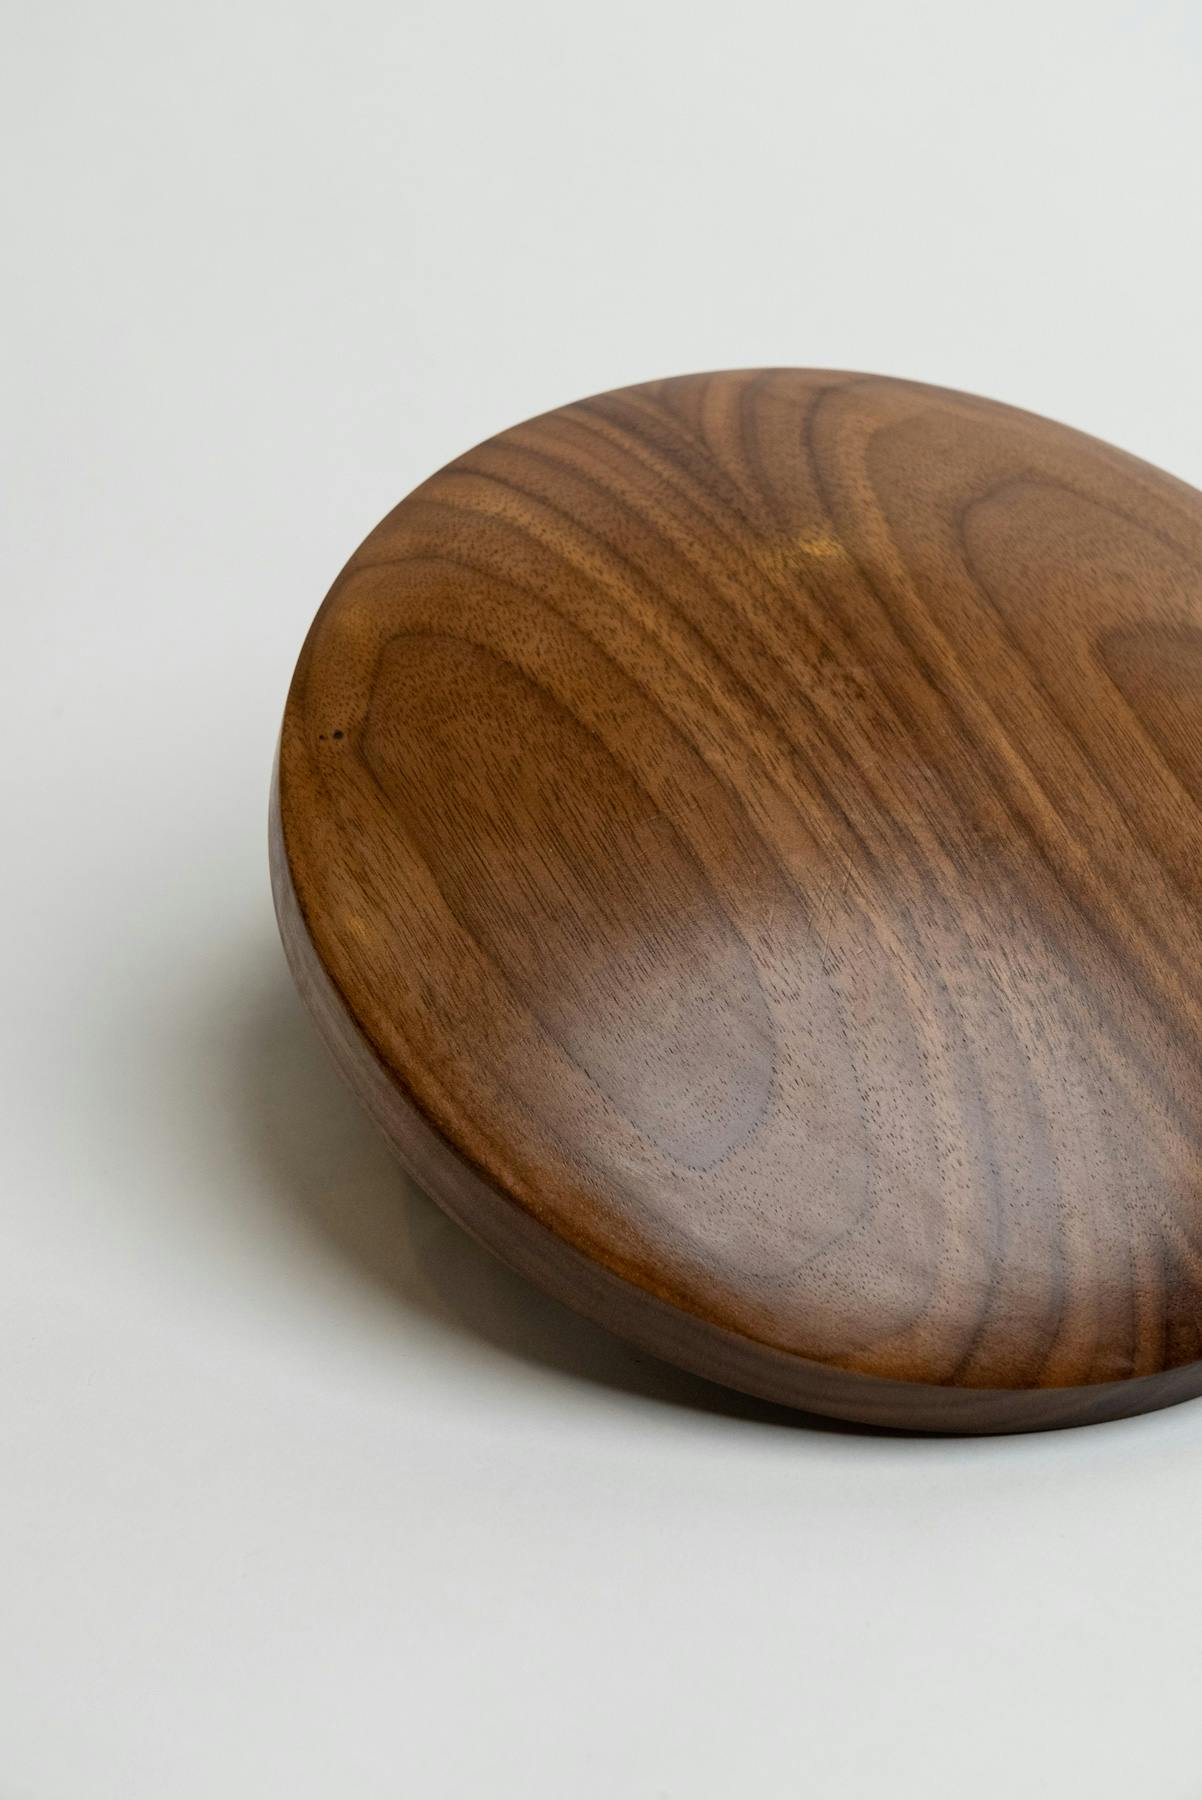 Close-up of the top of the walnut disc.